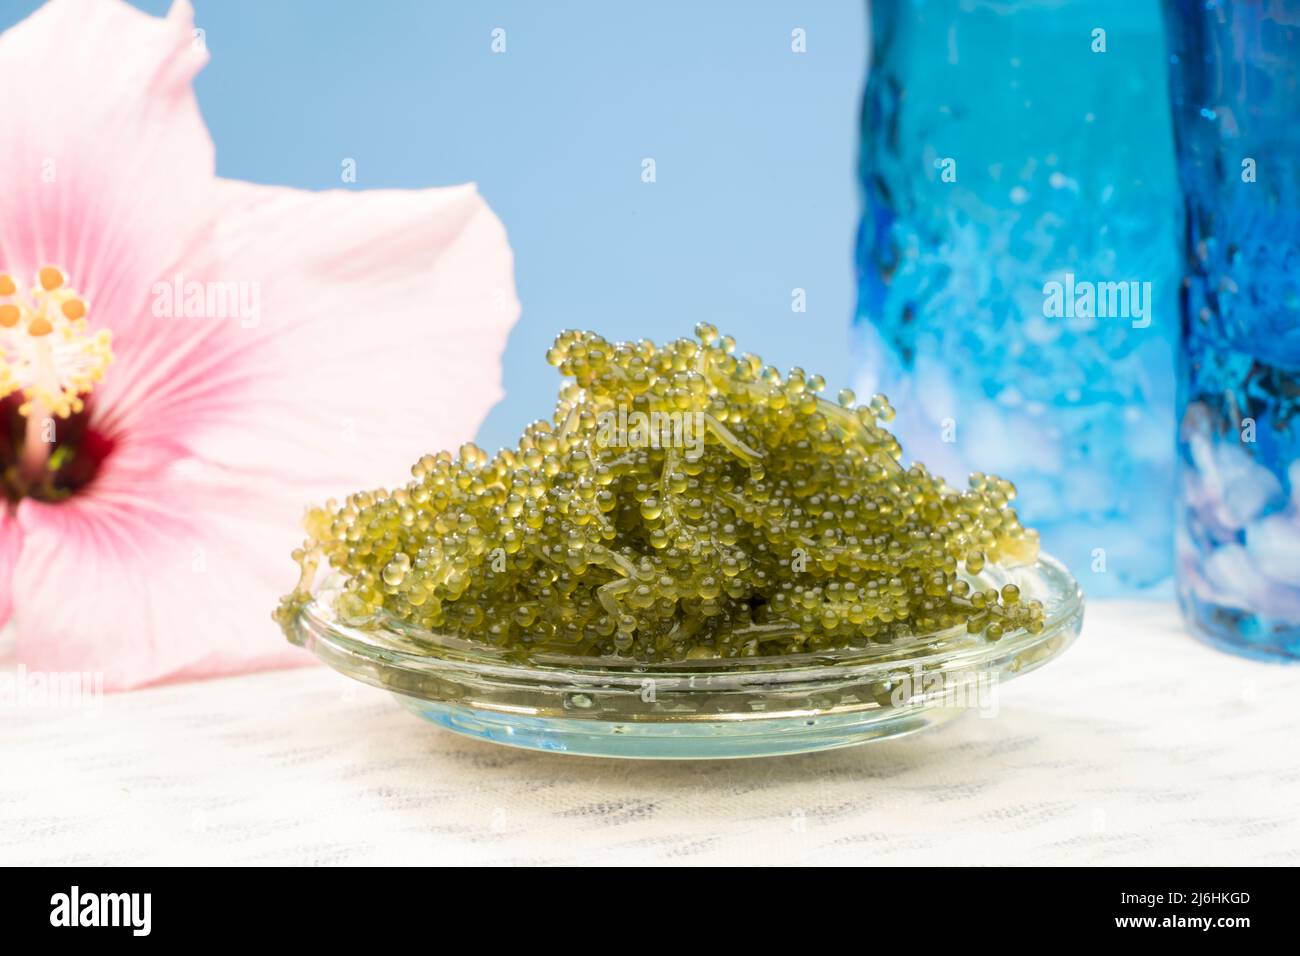 Umibudou or sea grapes a popular seaweed / algae eaten in Okinawa, Japan and known for its puchi puchi popping sensation. Stock Photo